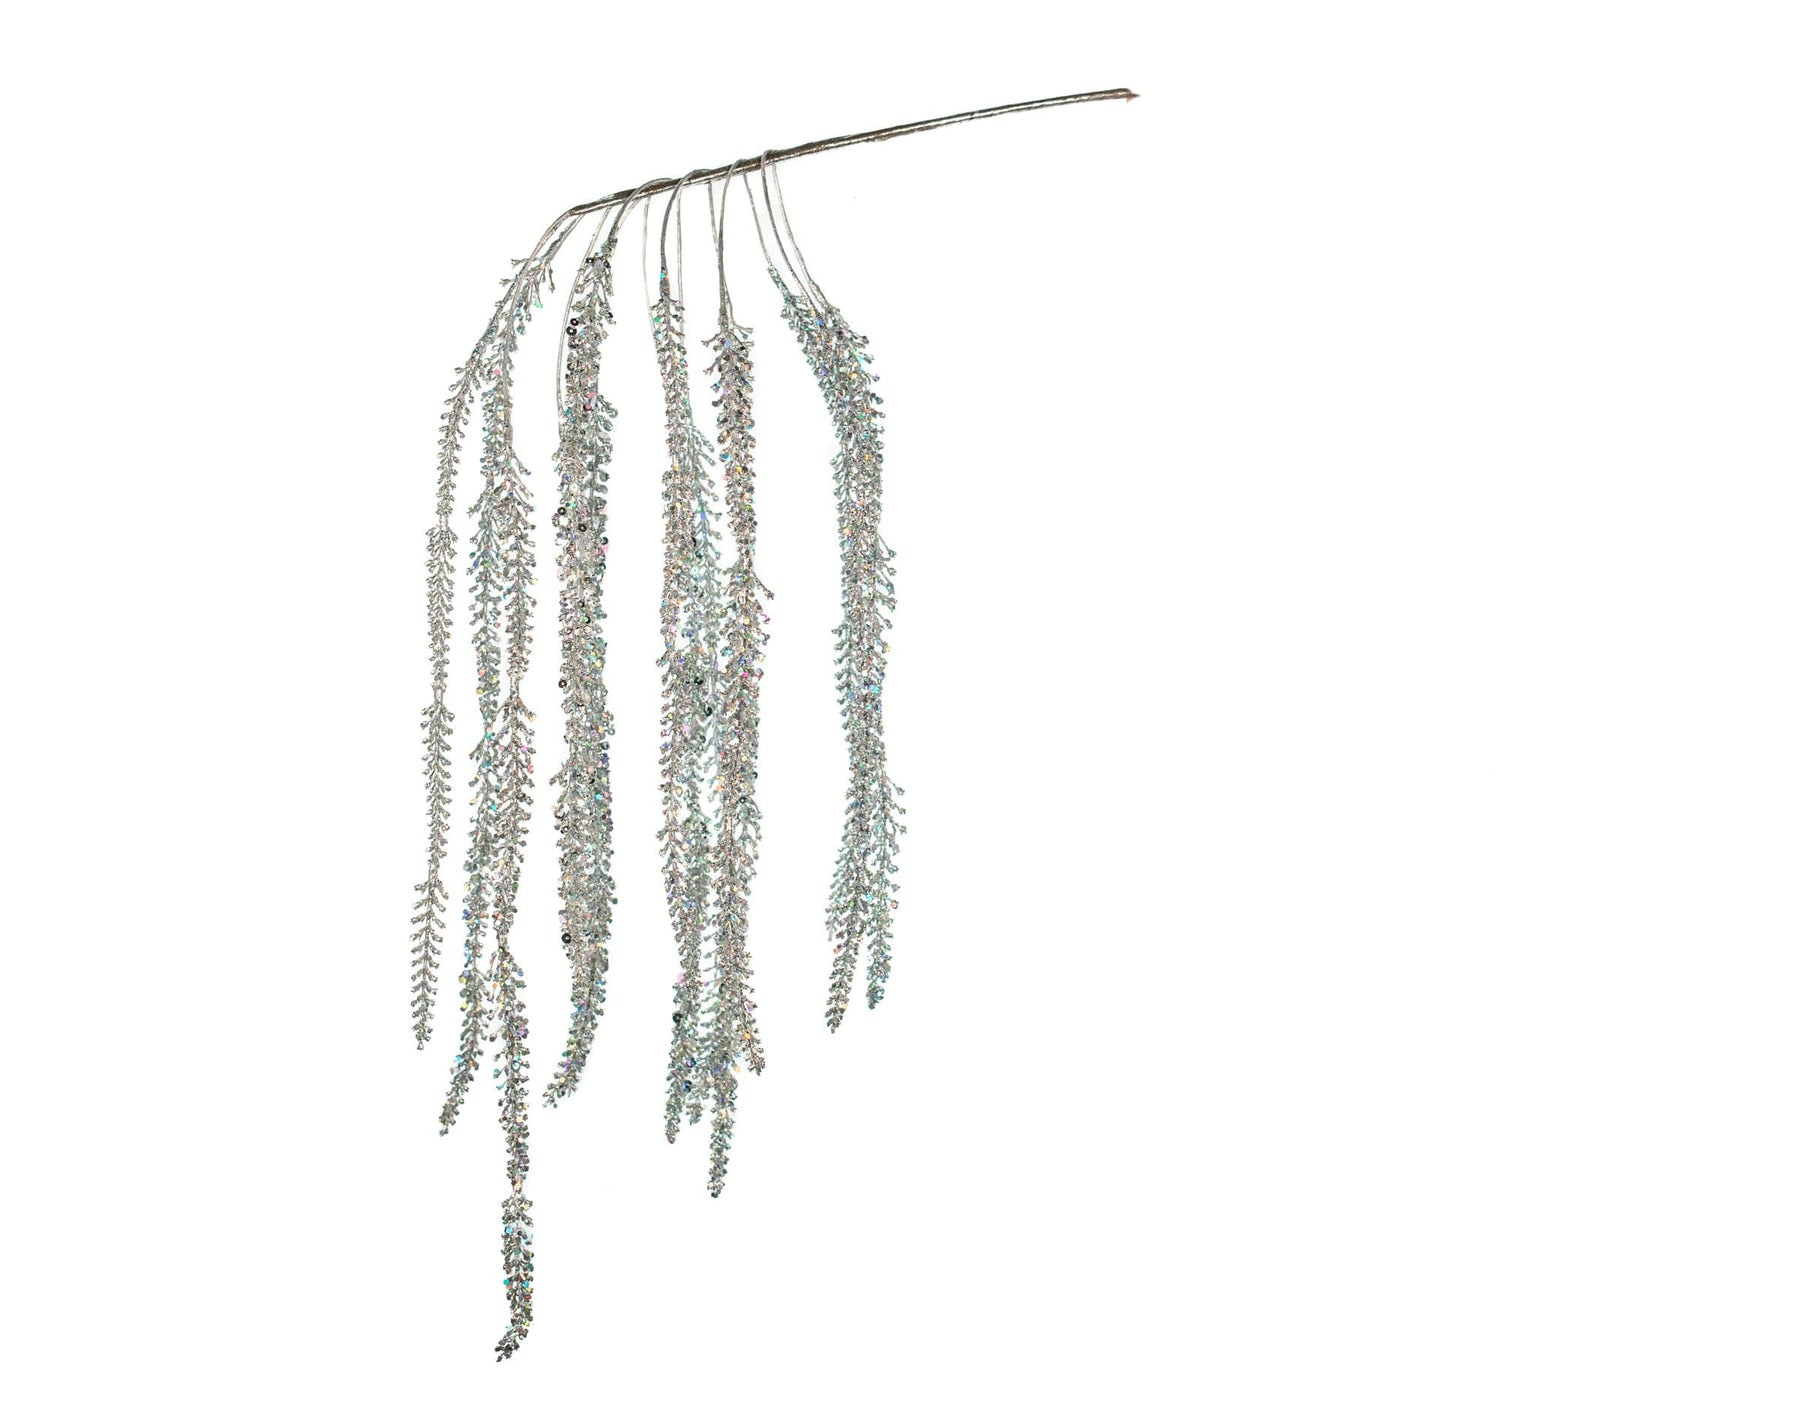 32" SILVER GLITTER HANGING BRANCH SET OF 6